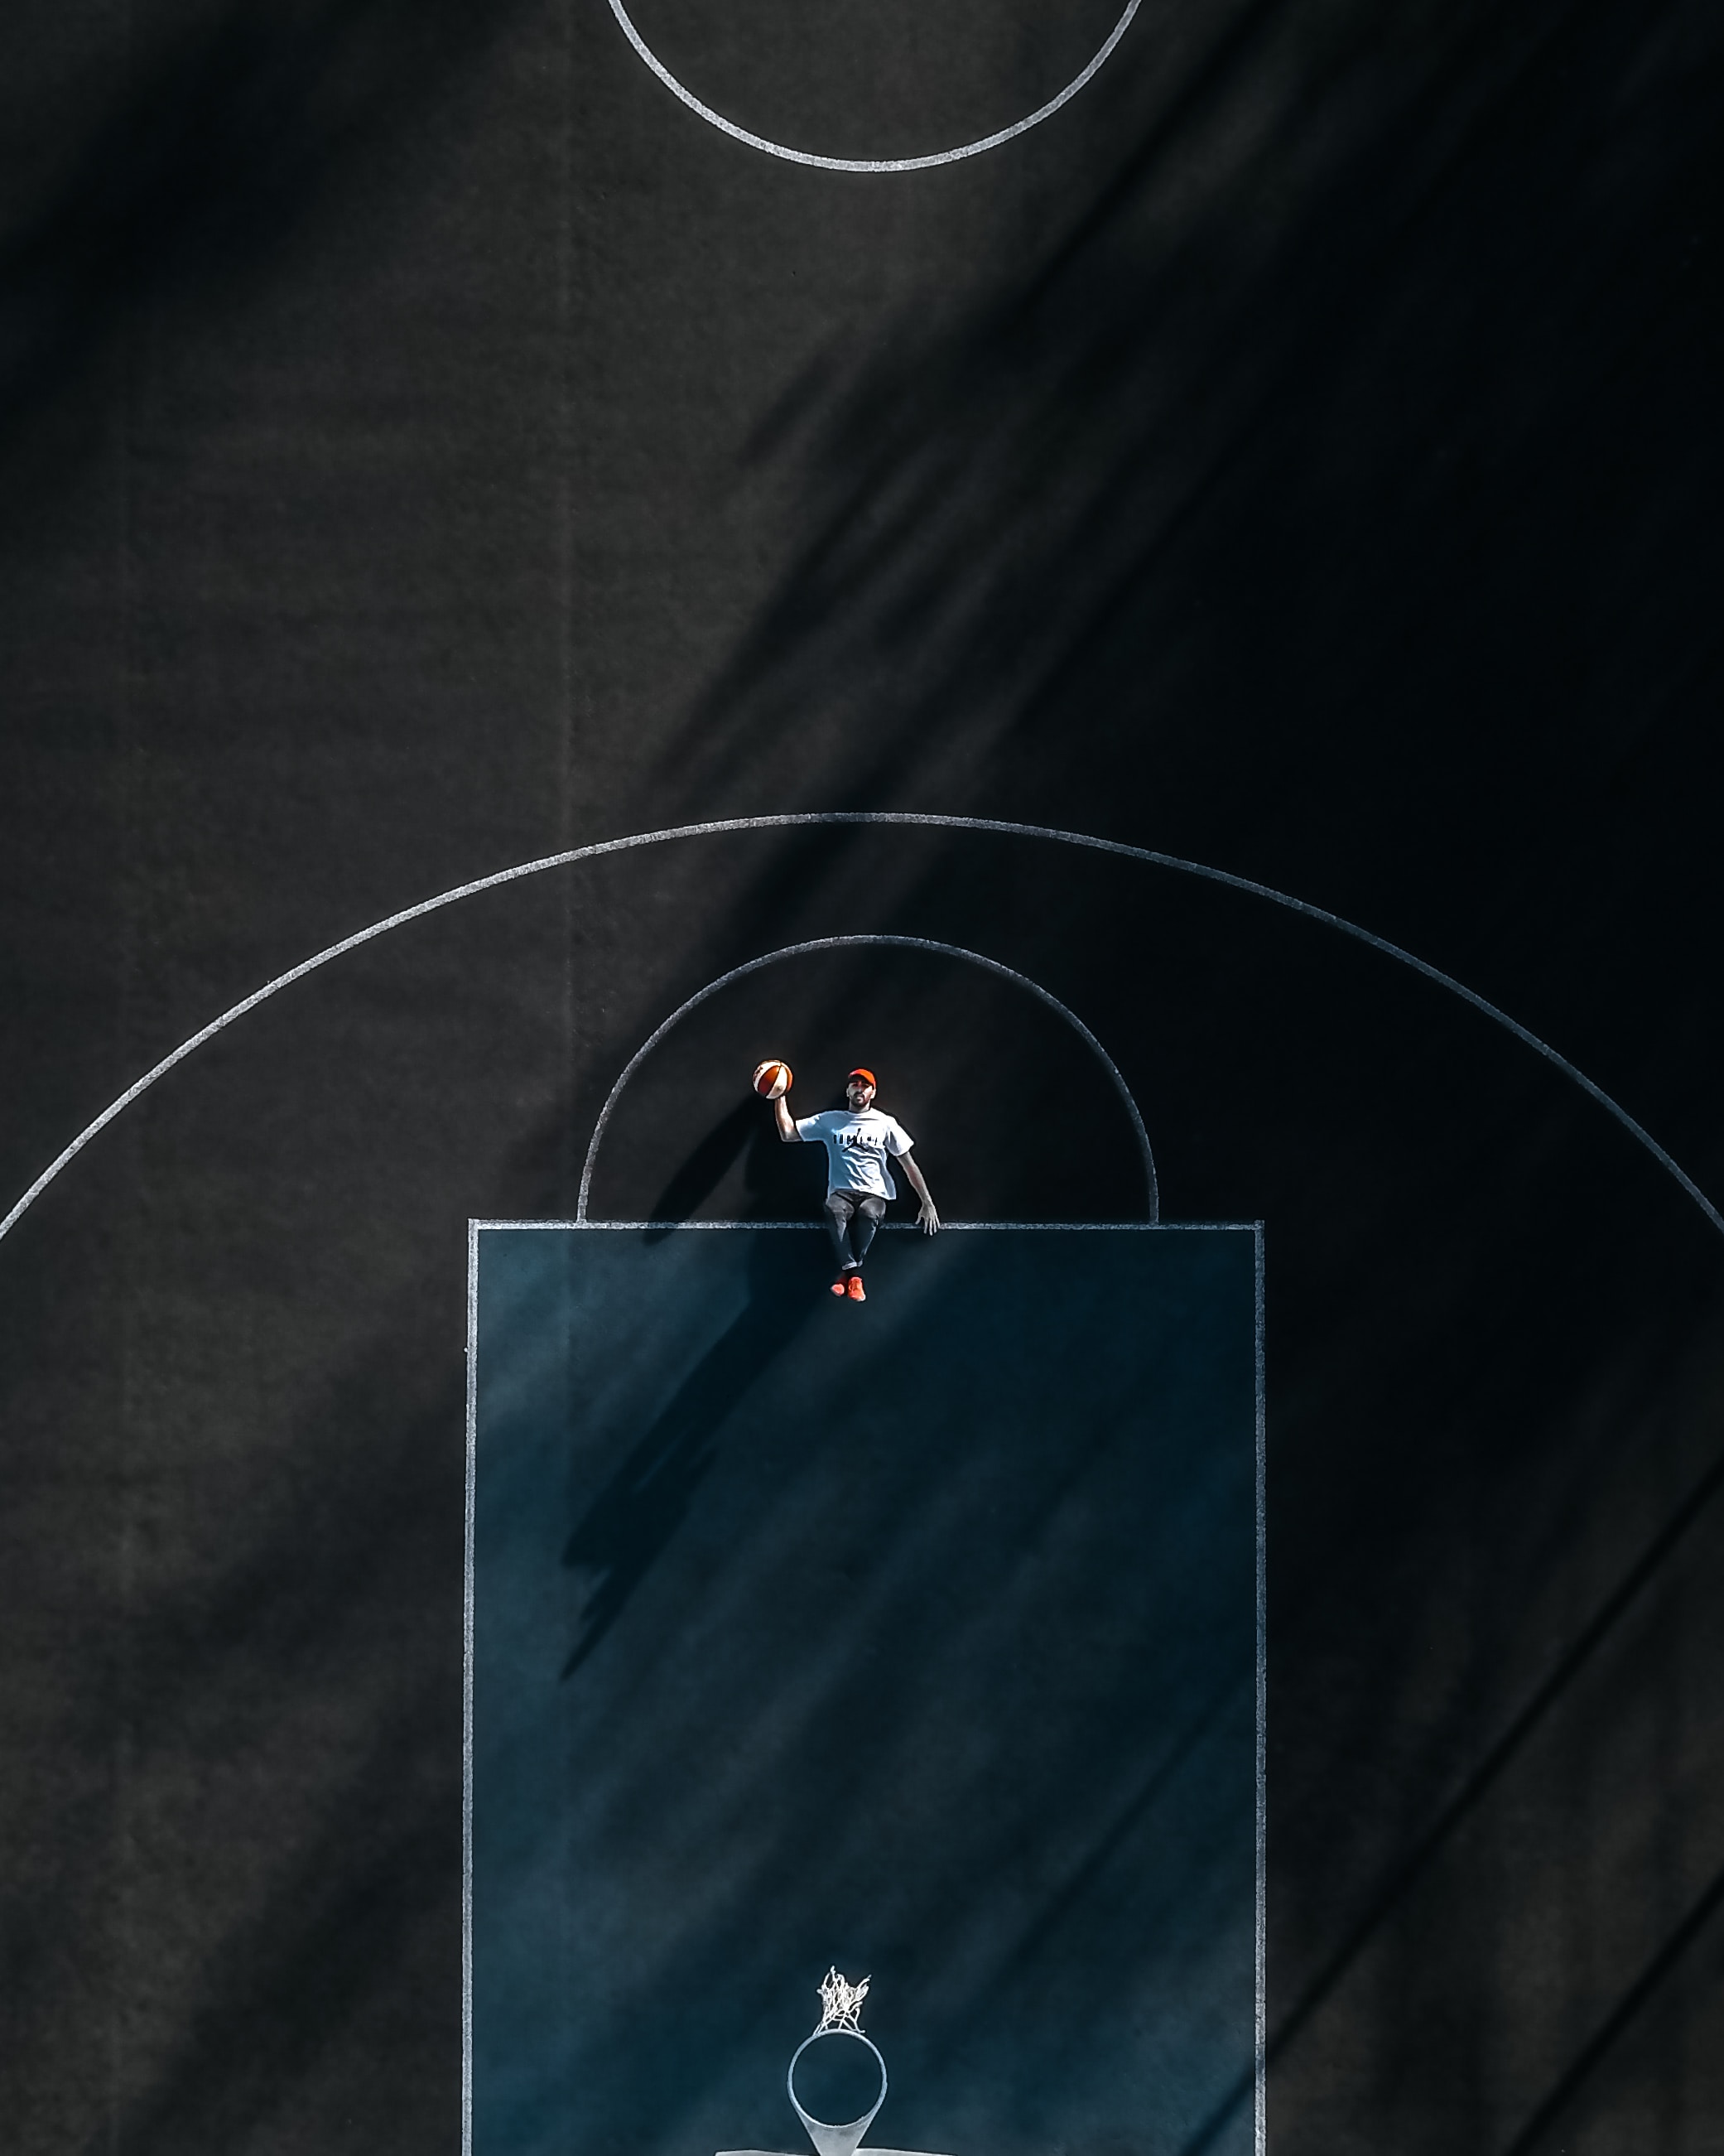 sports, basketball, view from above, markup, human, person, basketball playground, basketball court